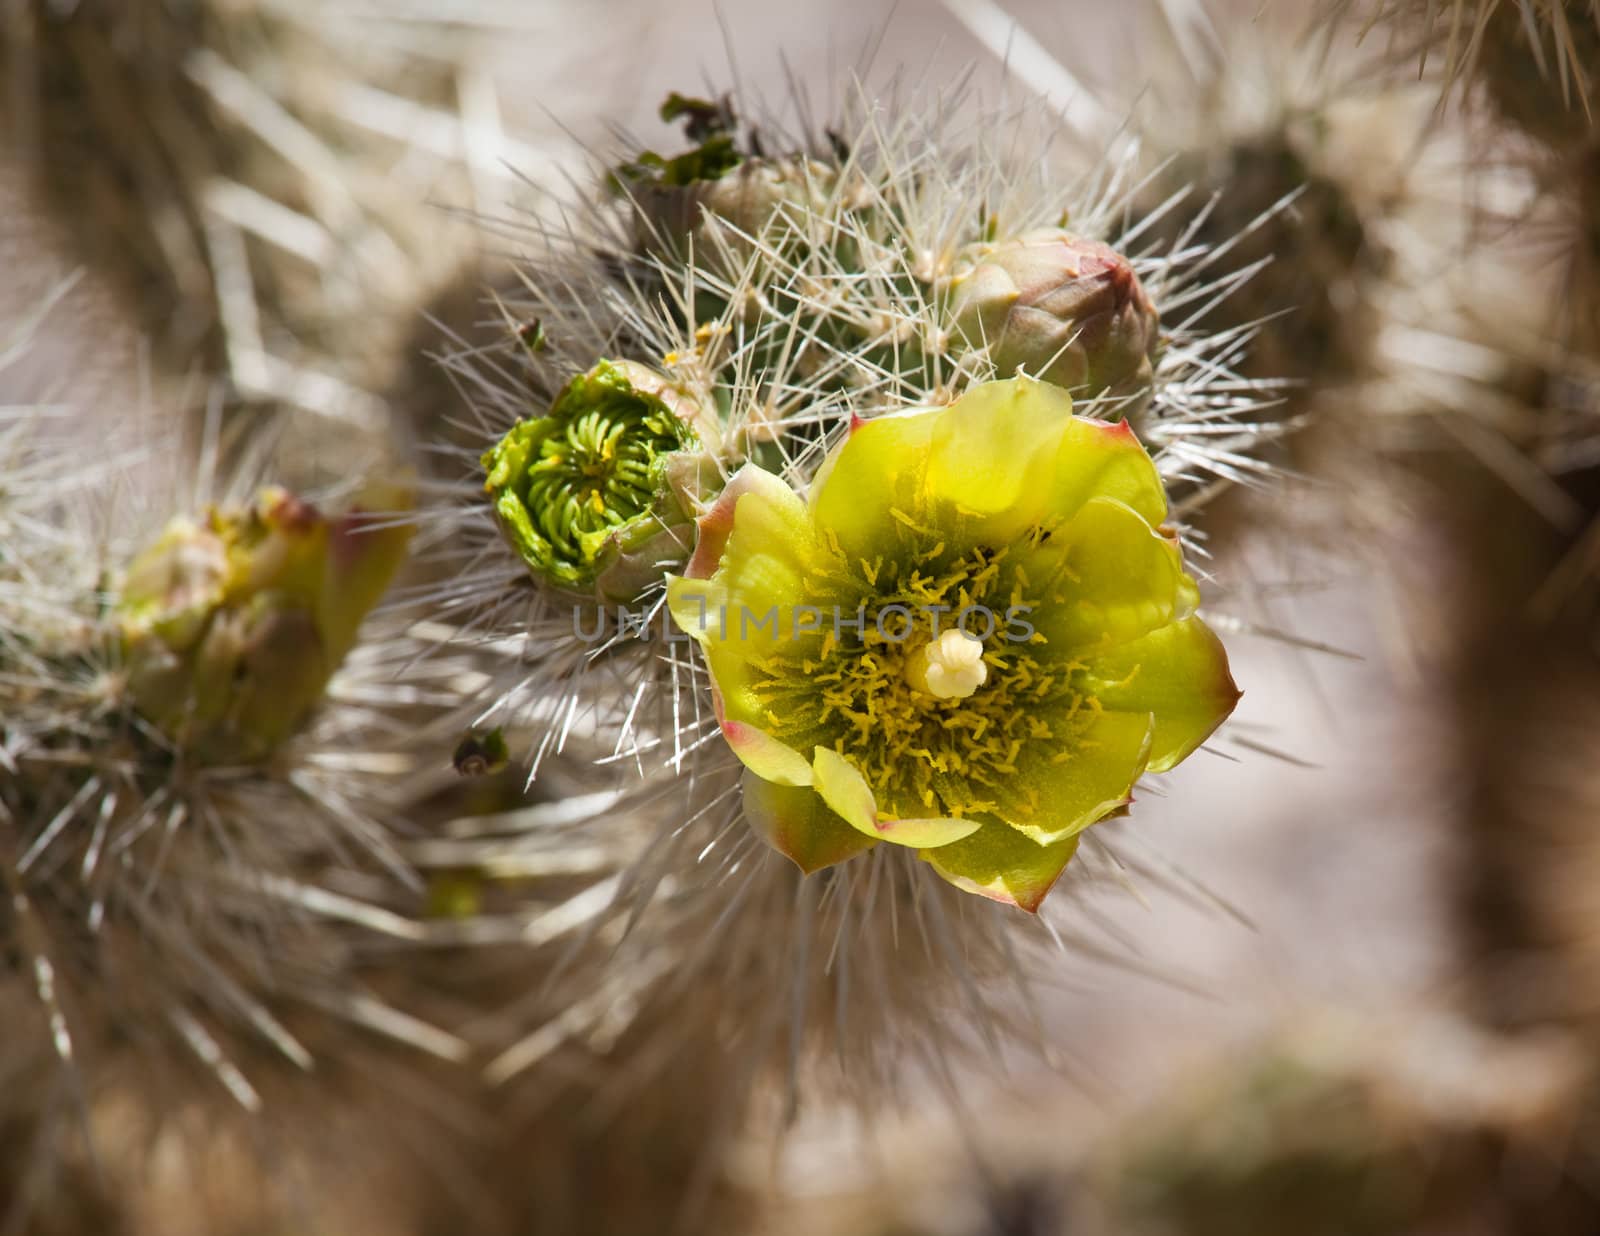 Bright yellow flower of the Barrel Cactus plant in desert in bloom after rainfall